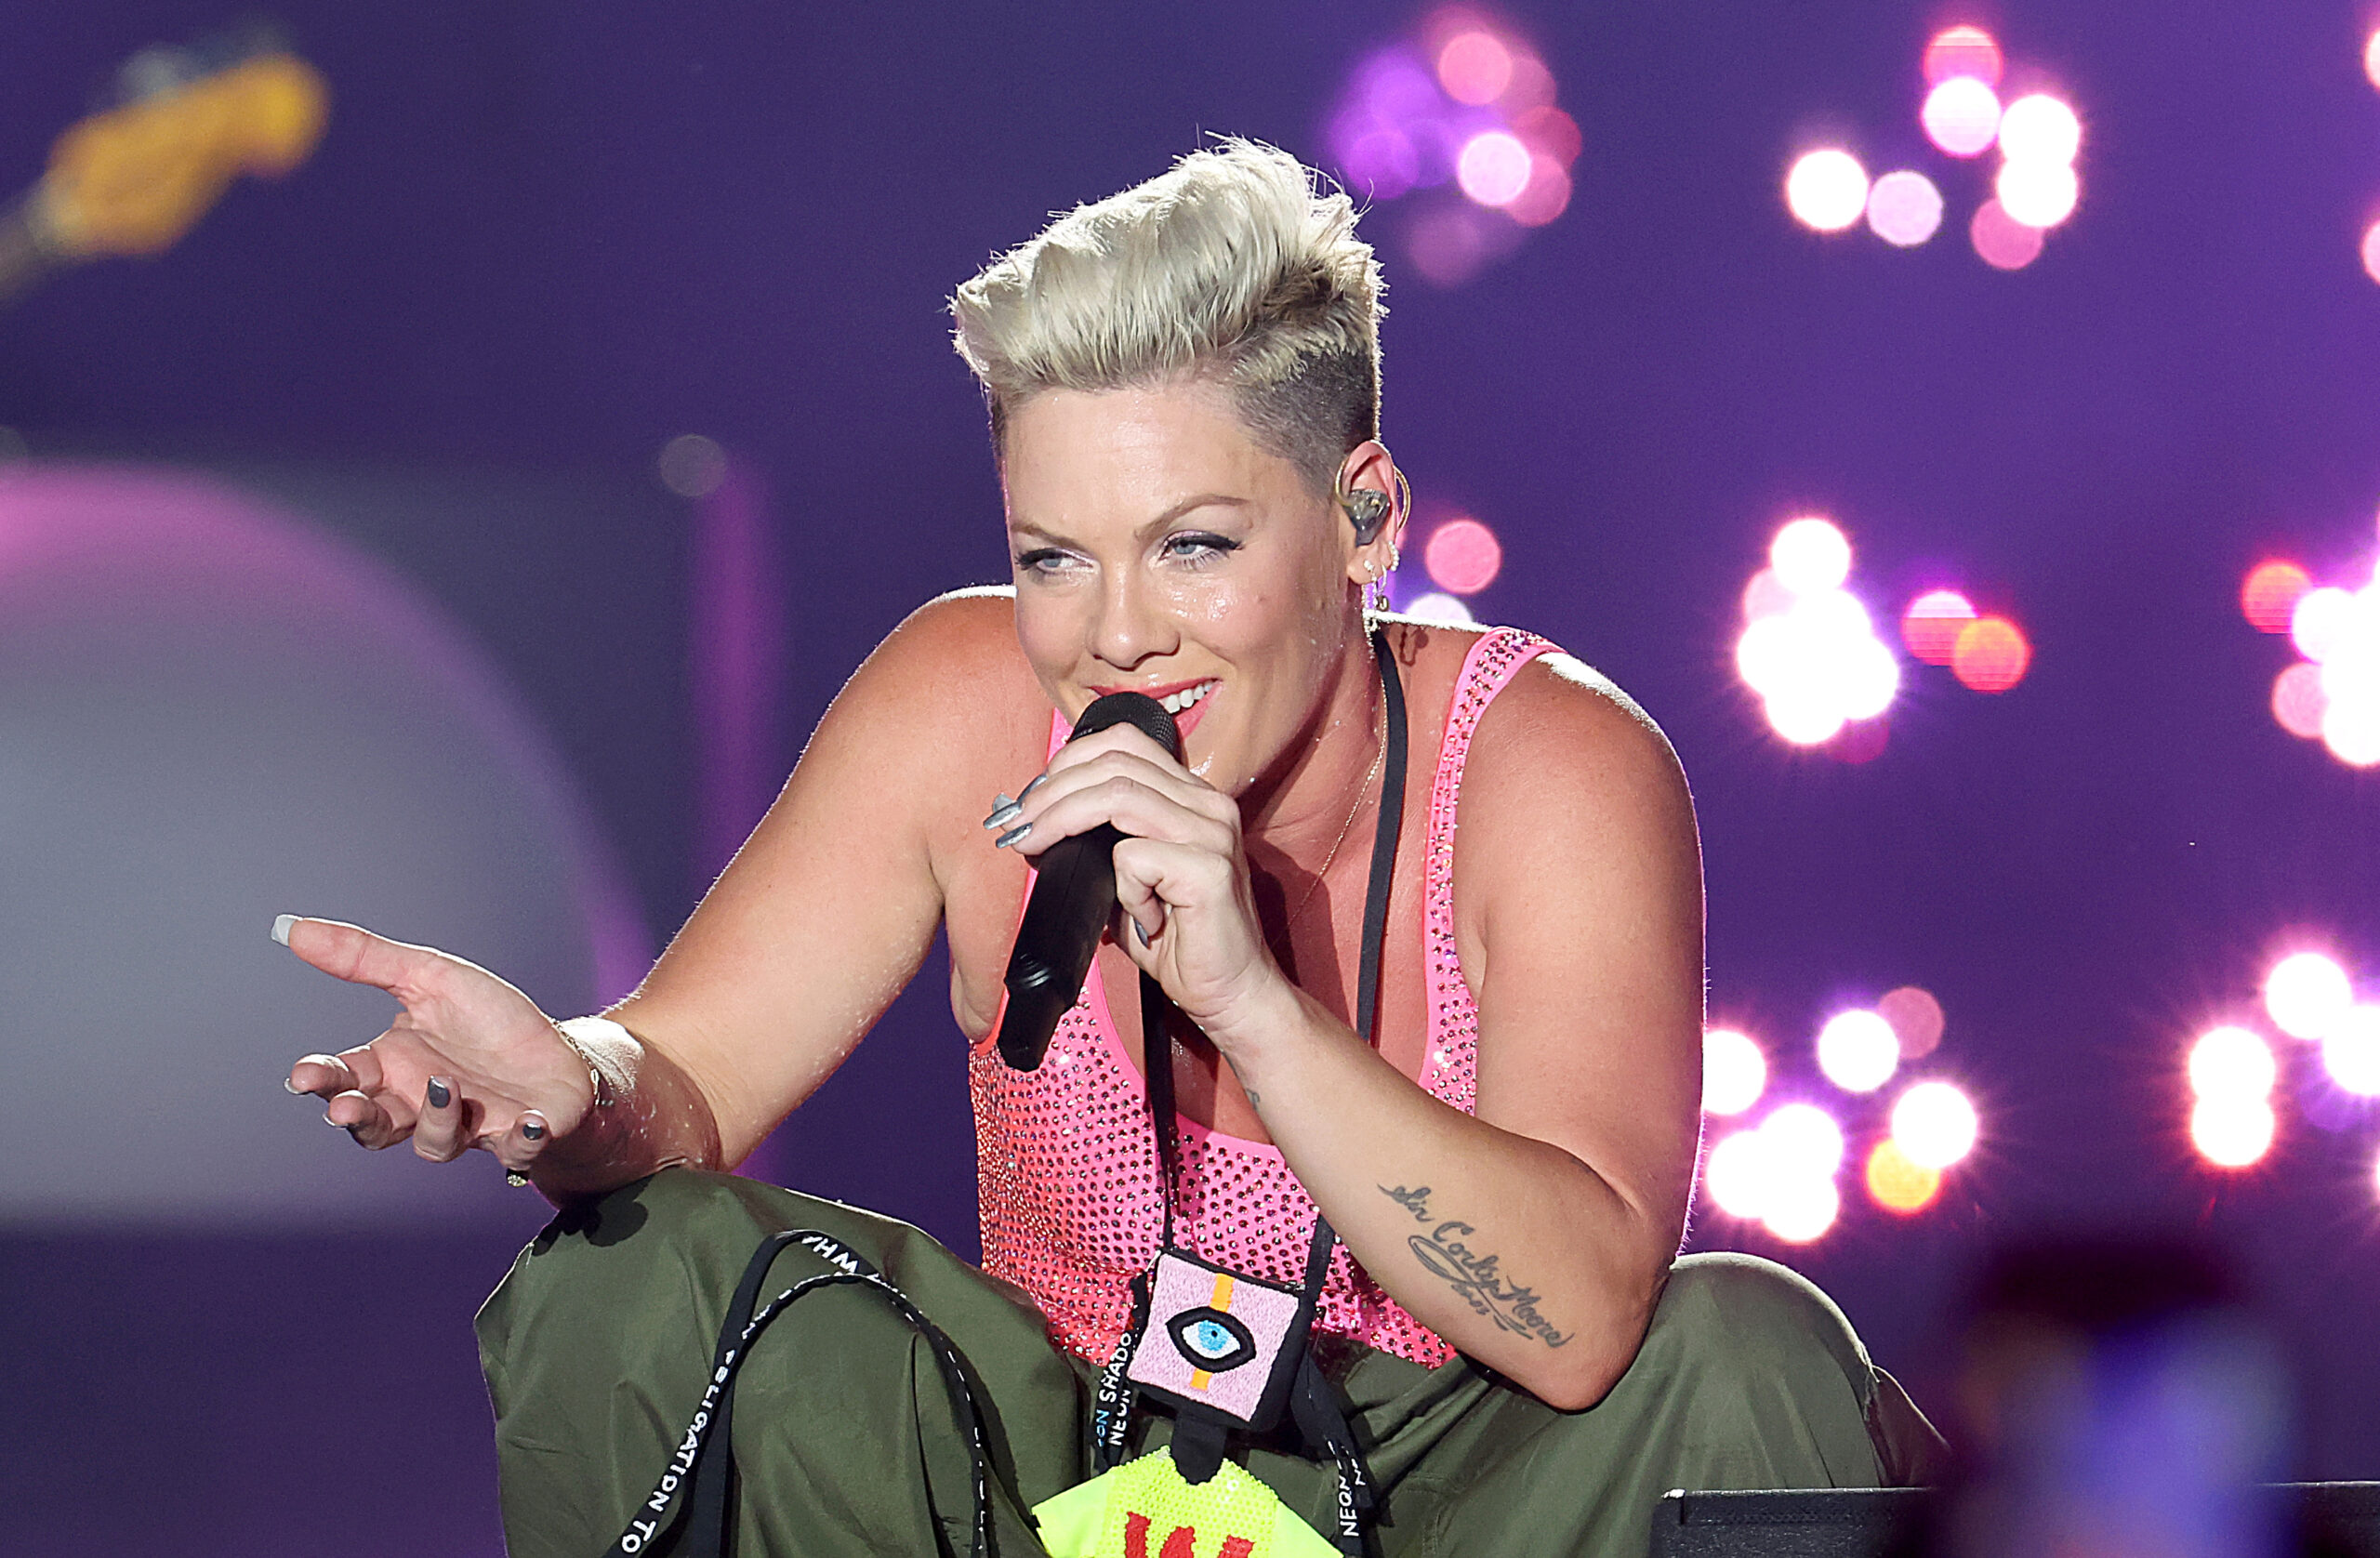 Pink denies displaying Israeli flags at concert, only supports the rainbow flag.